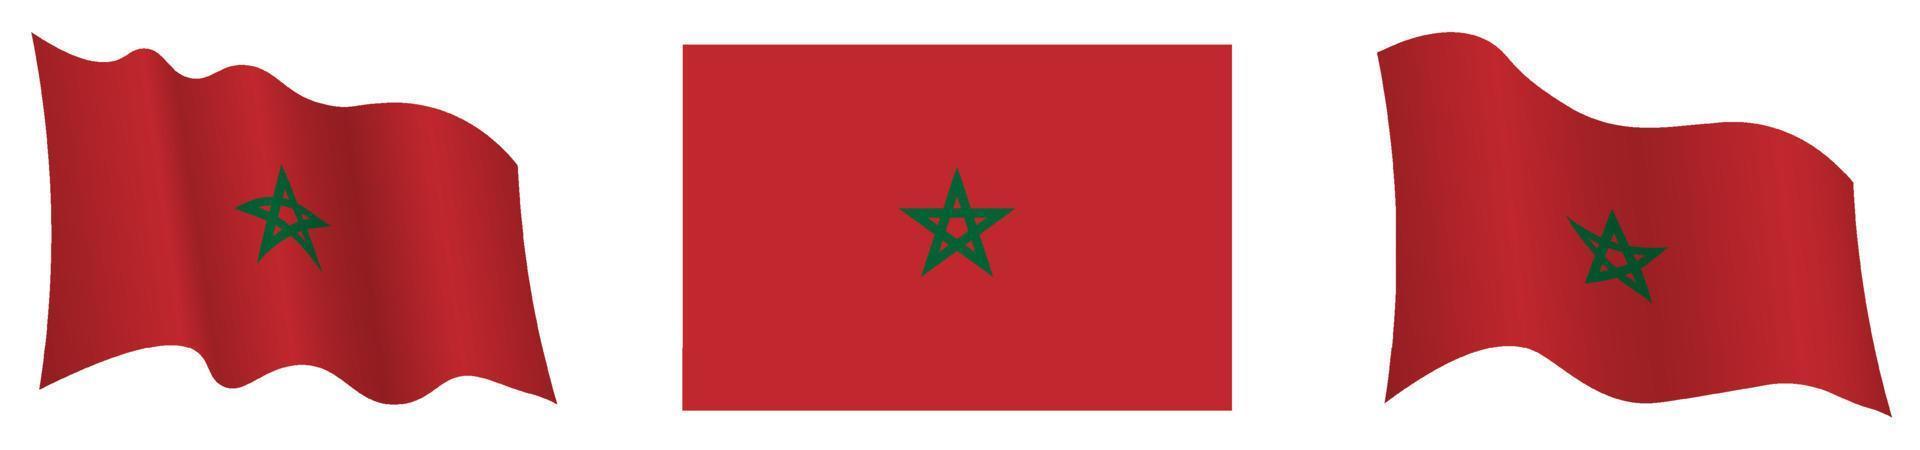 morocco flag in static position and in motion, fluttering in wind in exact colors and sizes, on white background vector